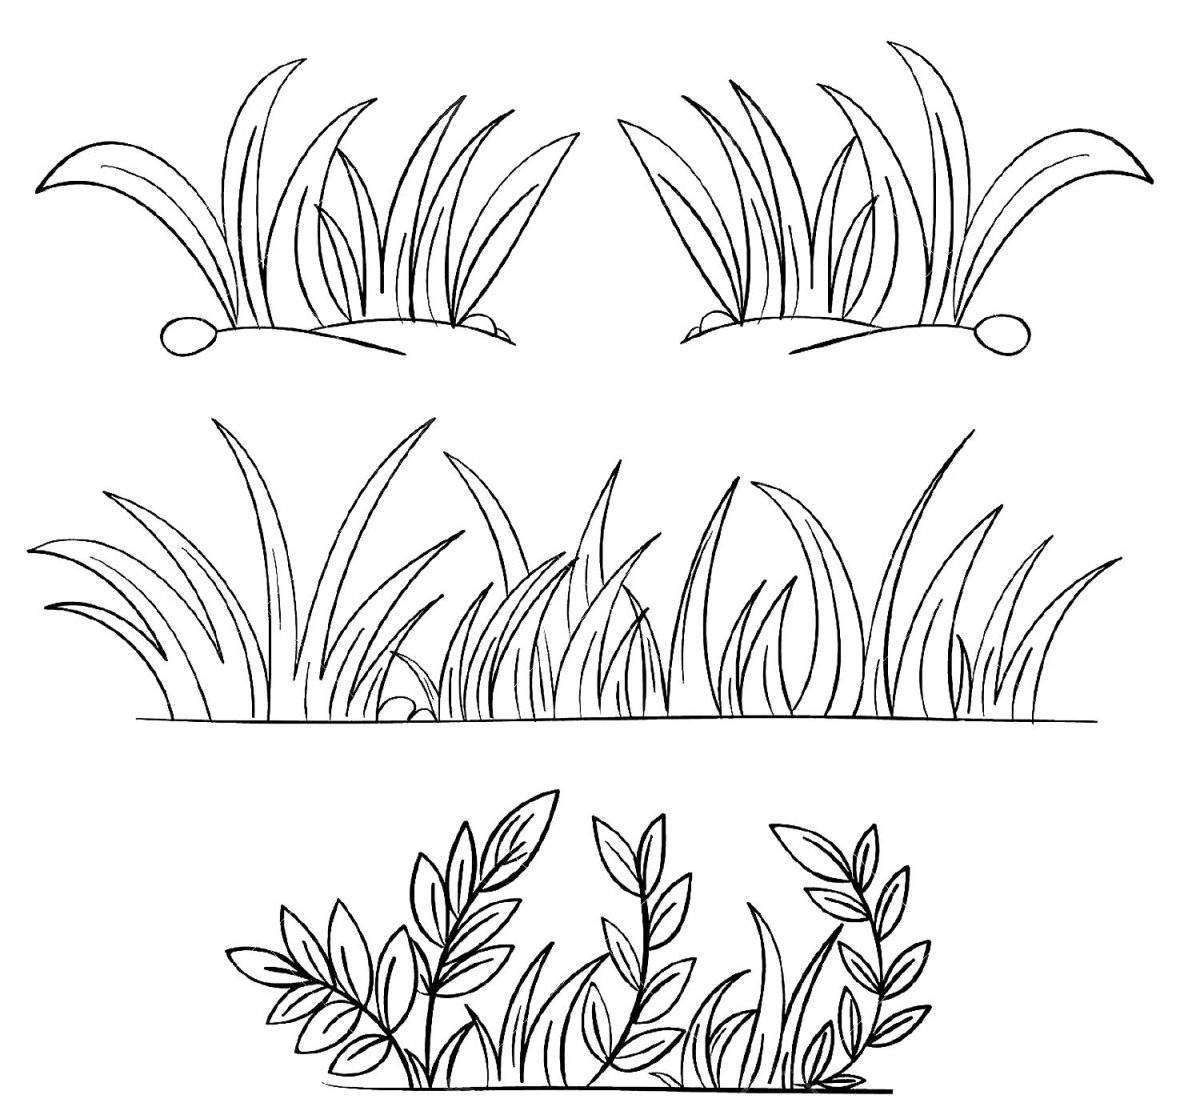 Fun coloring book with weeds for kids